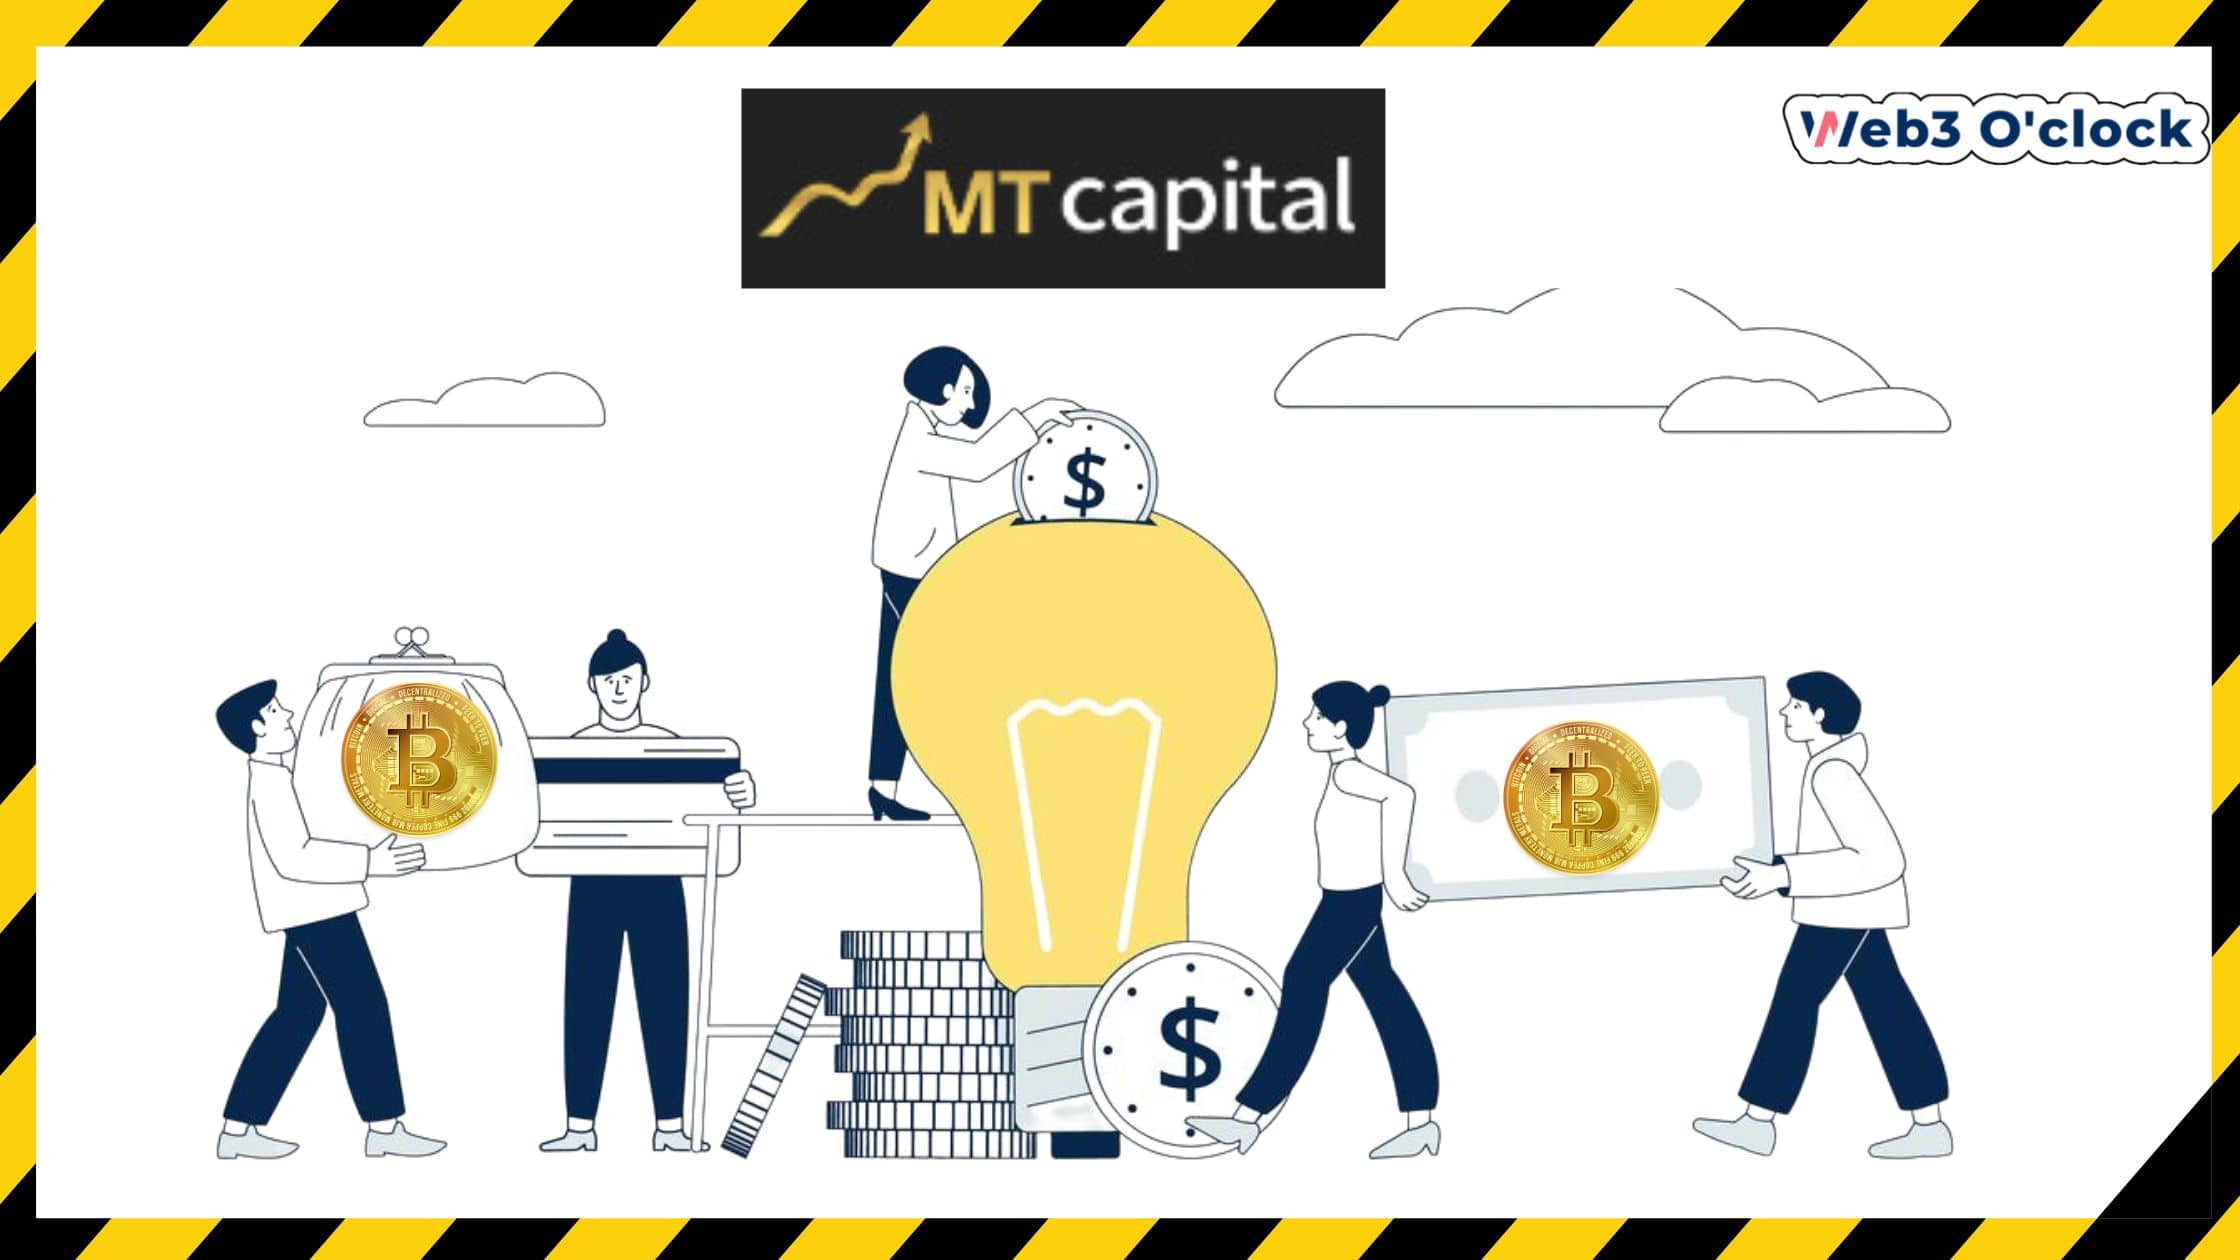 Momentum Capital's $10M Investment by web3oclock